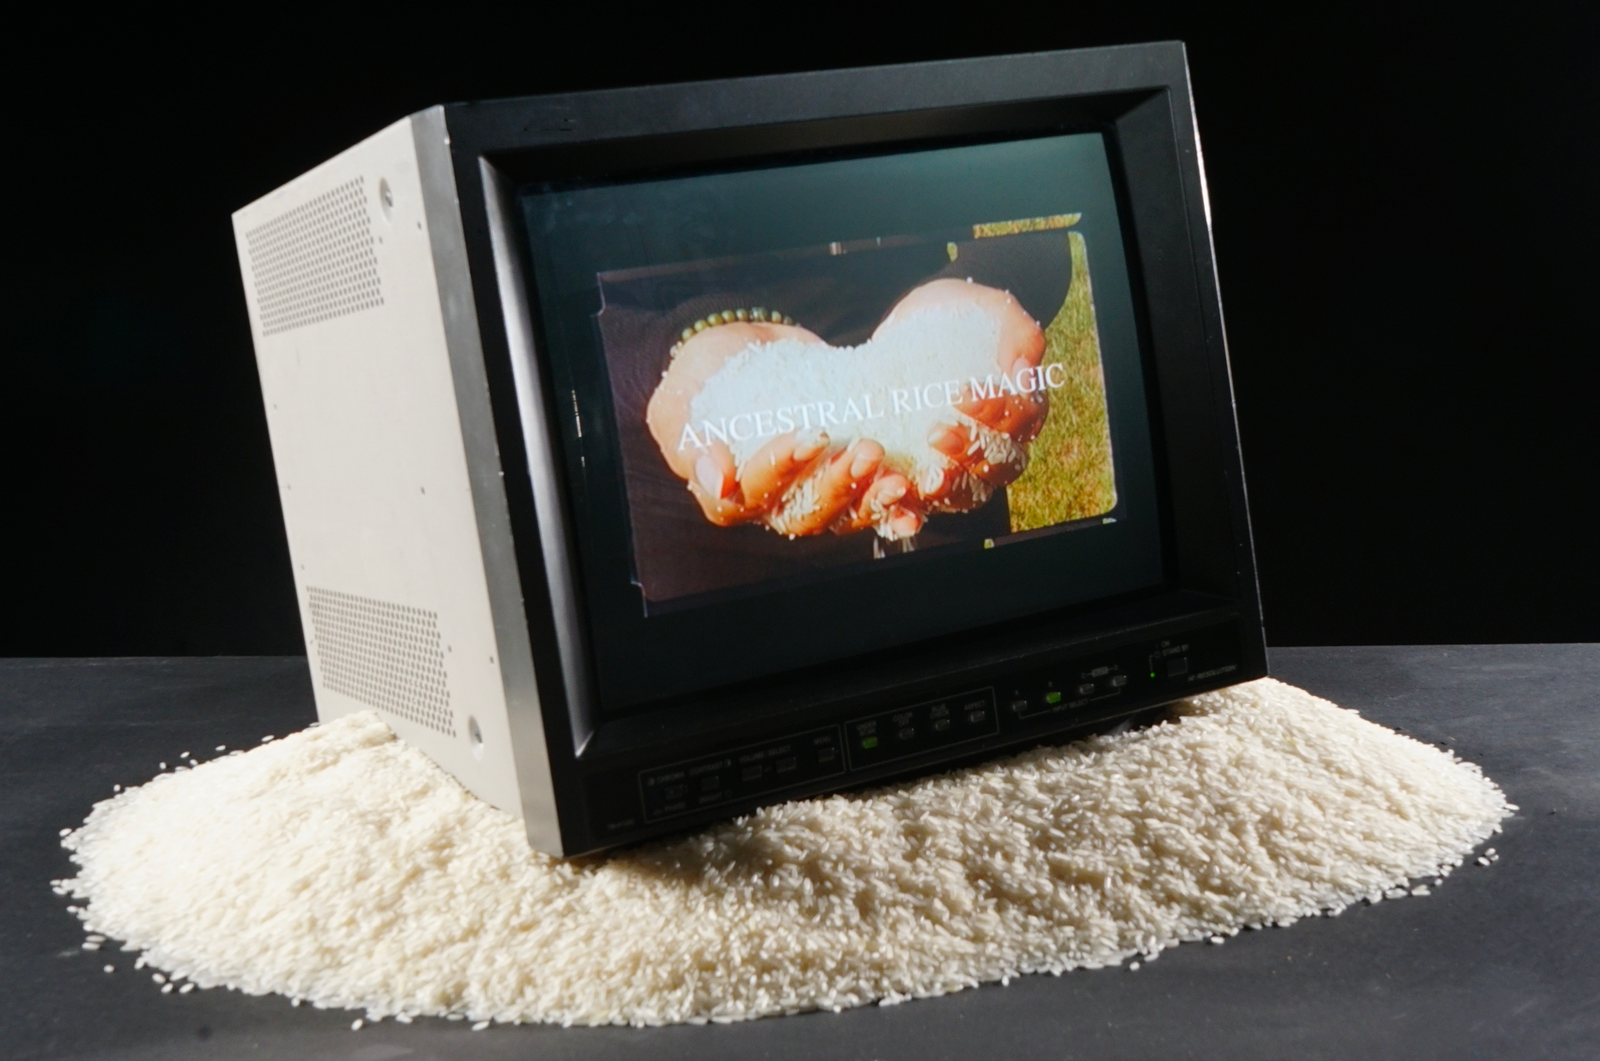 CRT monitor on a small mountain of rice.  Screen showing title of video with hands holding rice 